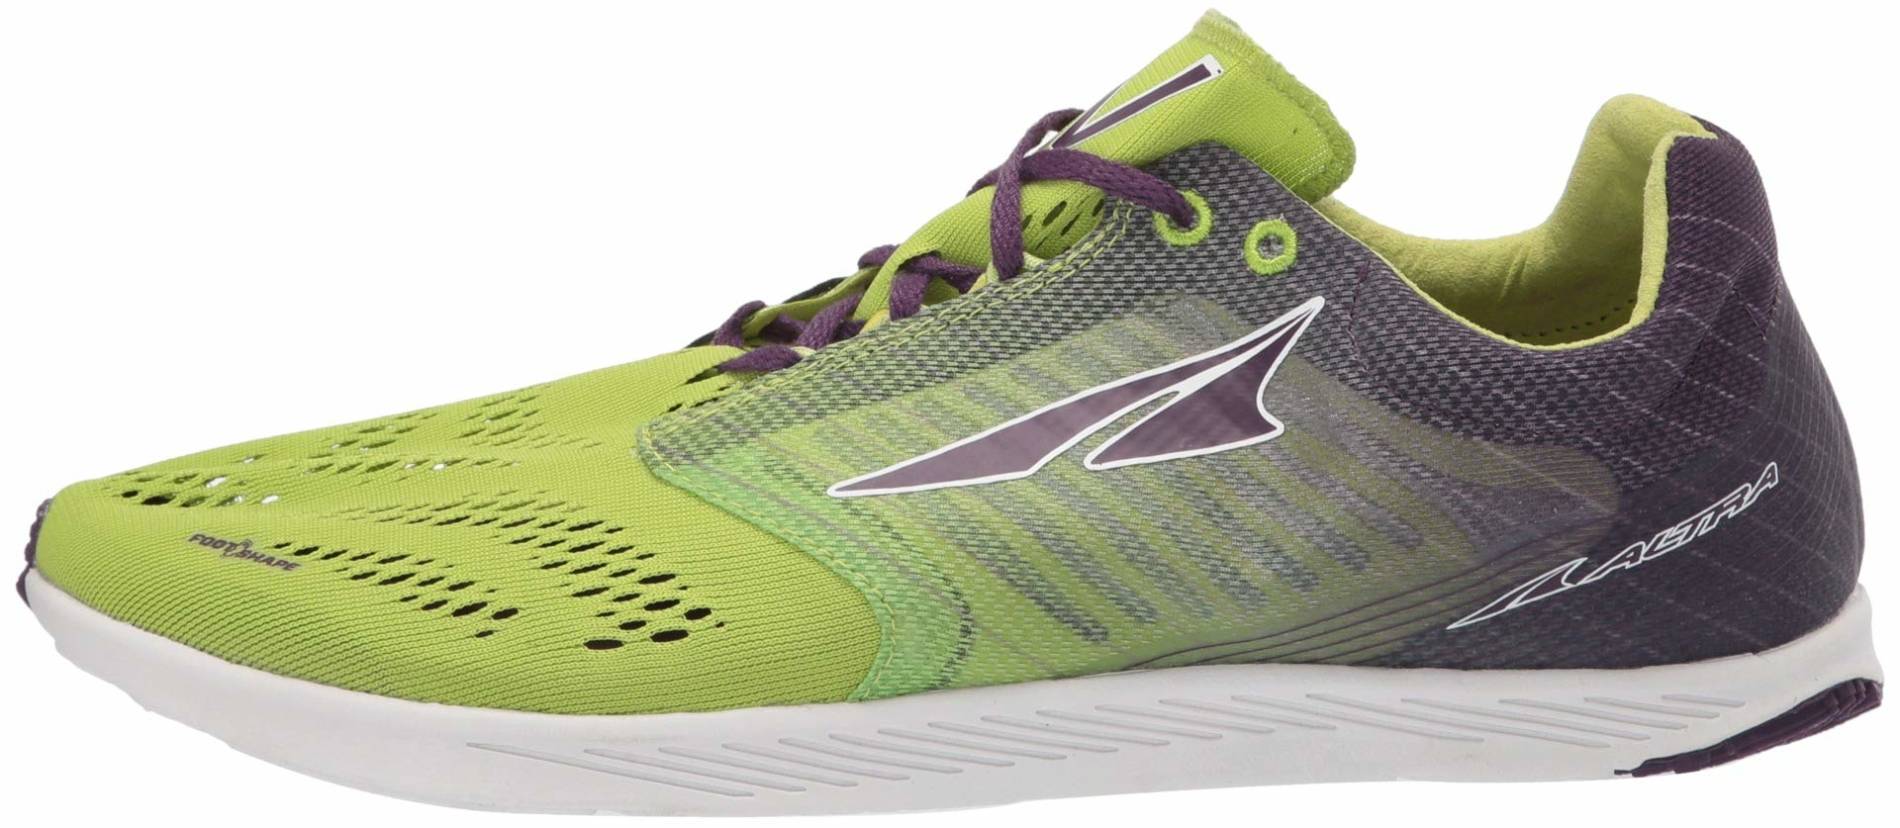 Only £82 + Review of Altra Vanish-R 